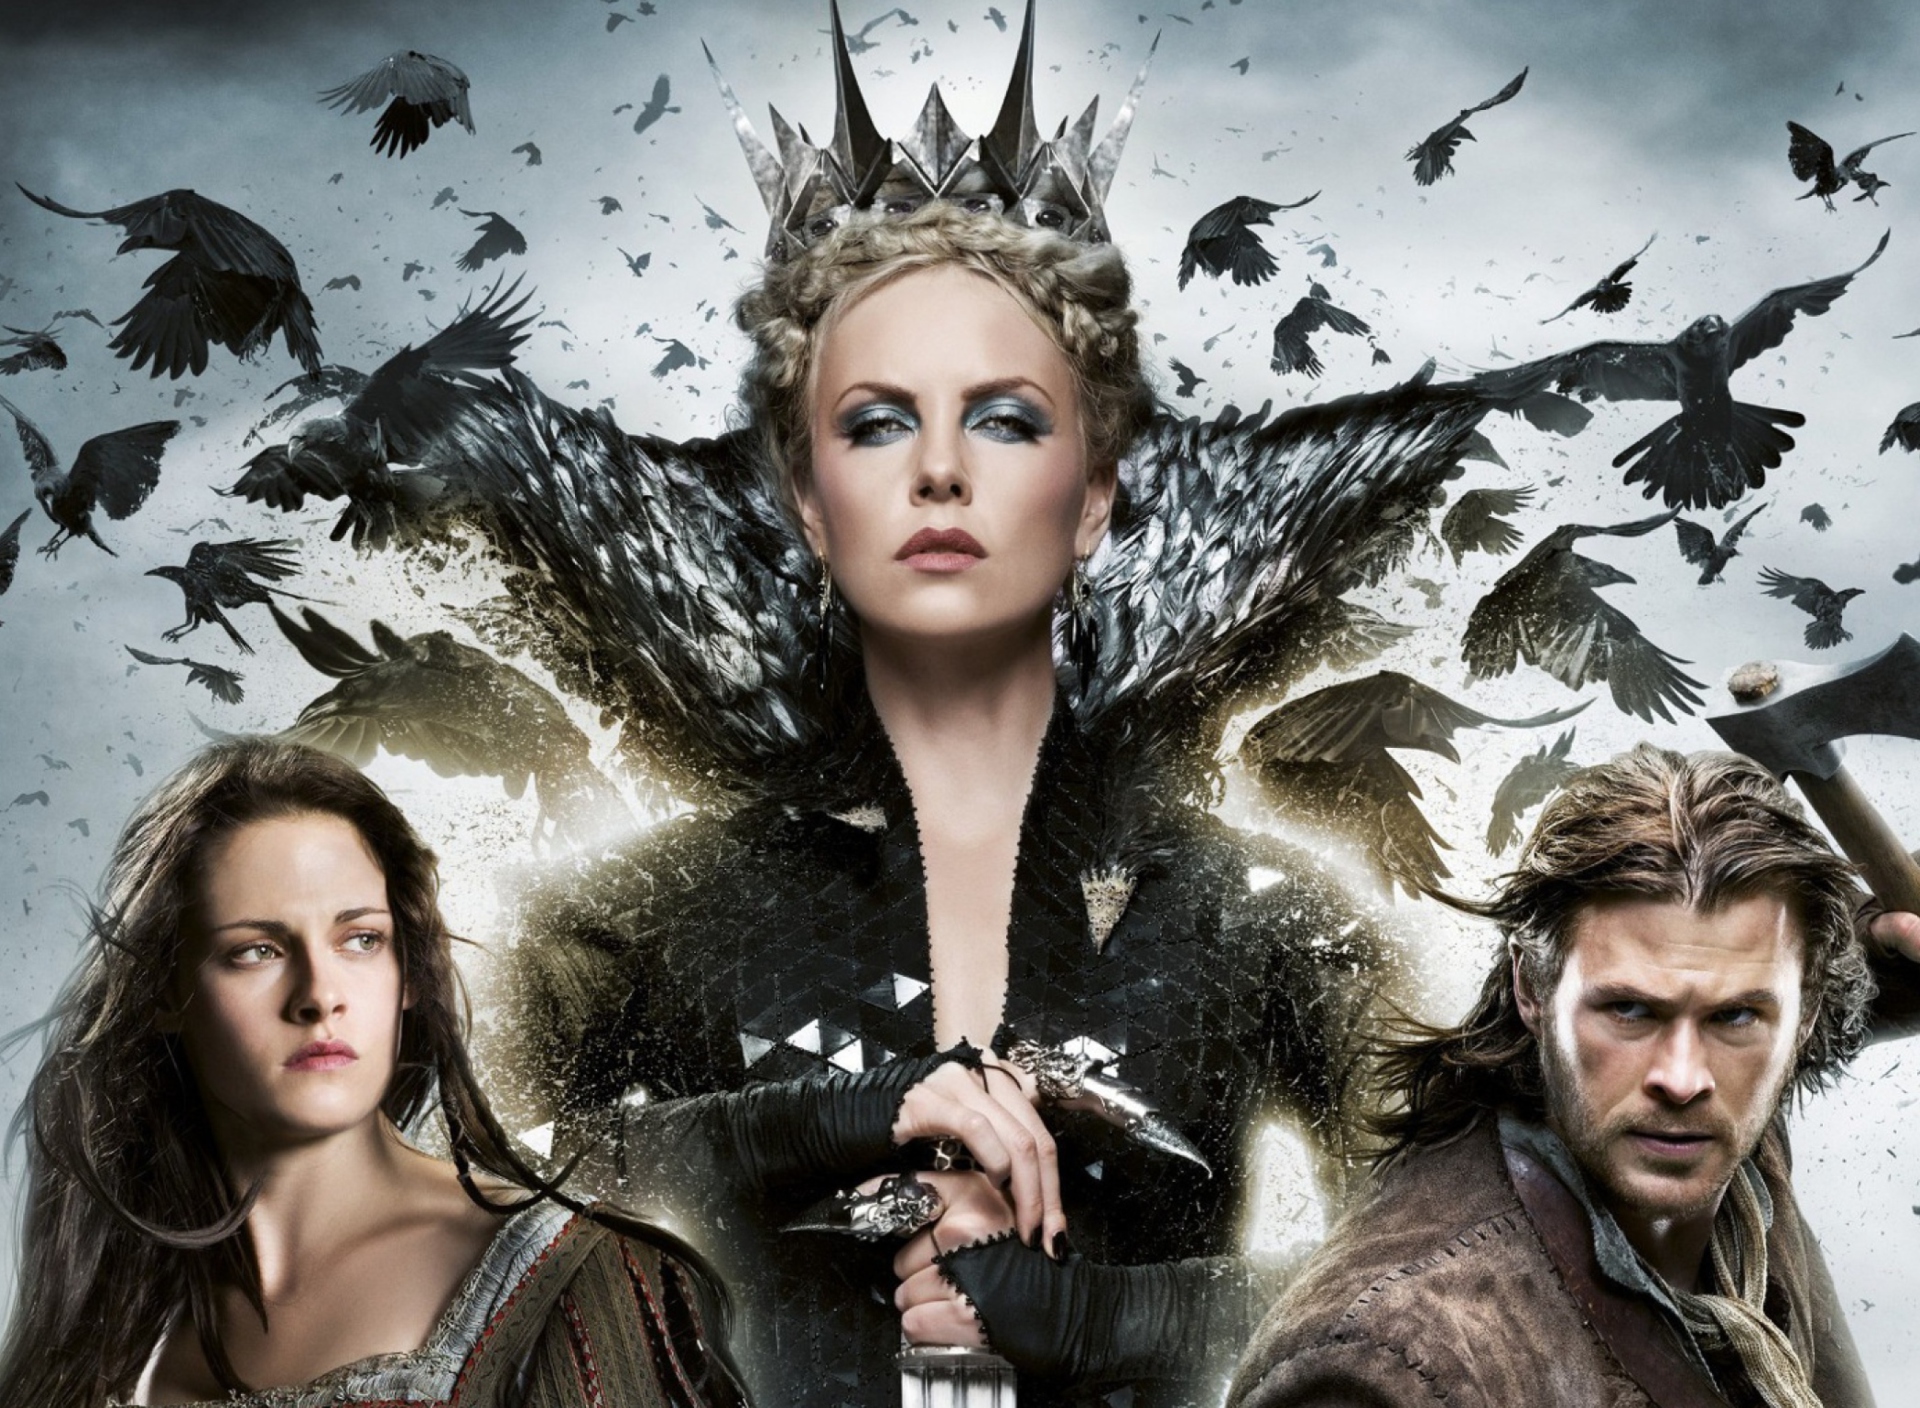 Snow White And The Huntsman wallpaper 1920x1408